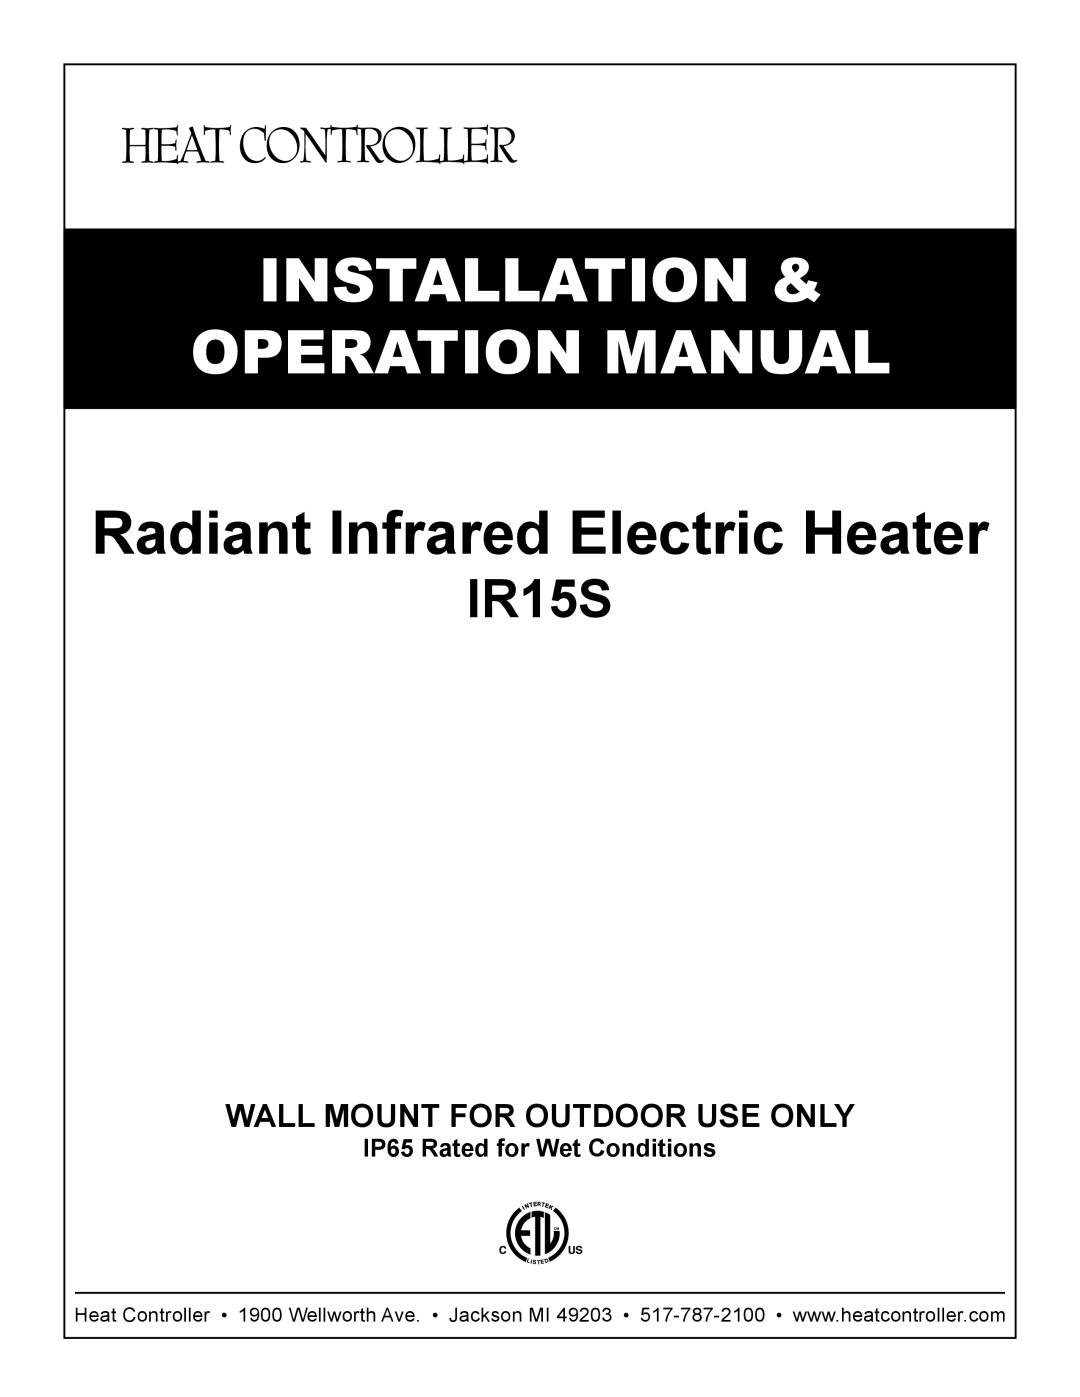 Heat Controller IR15S operation manual Radiant Infrared Electric Heater, Wall Mount For Outdoor Use Only 